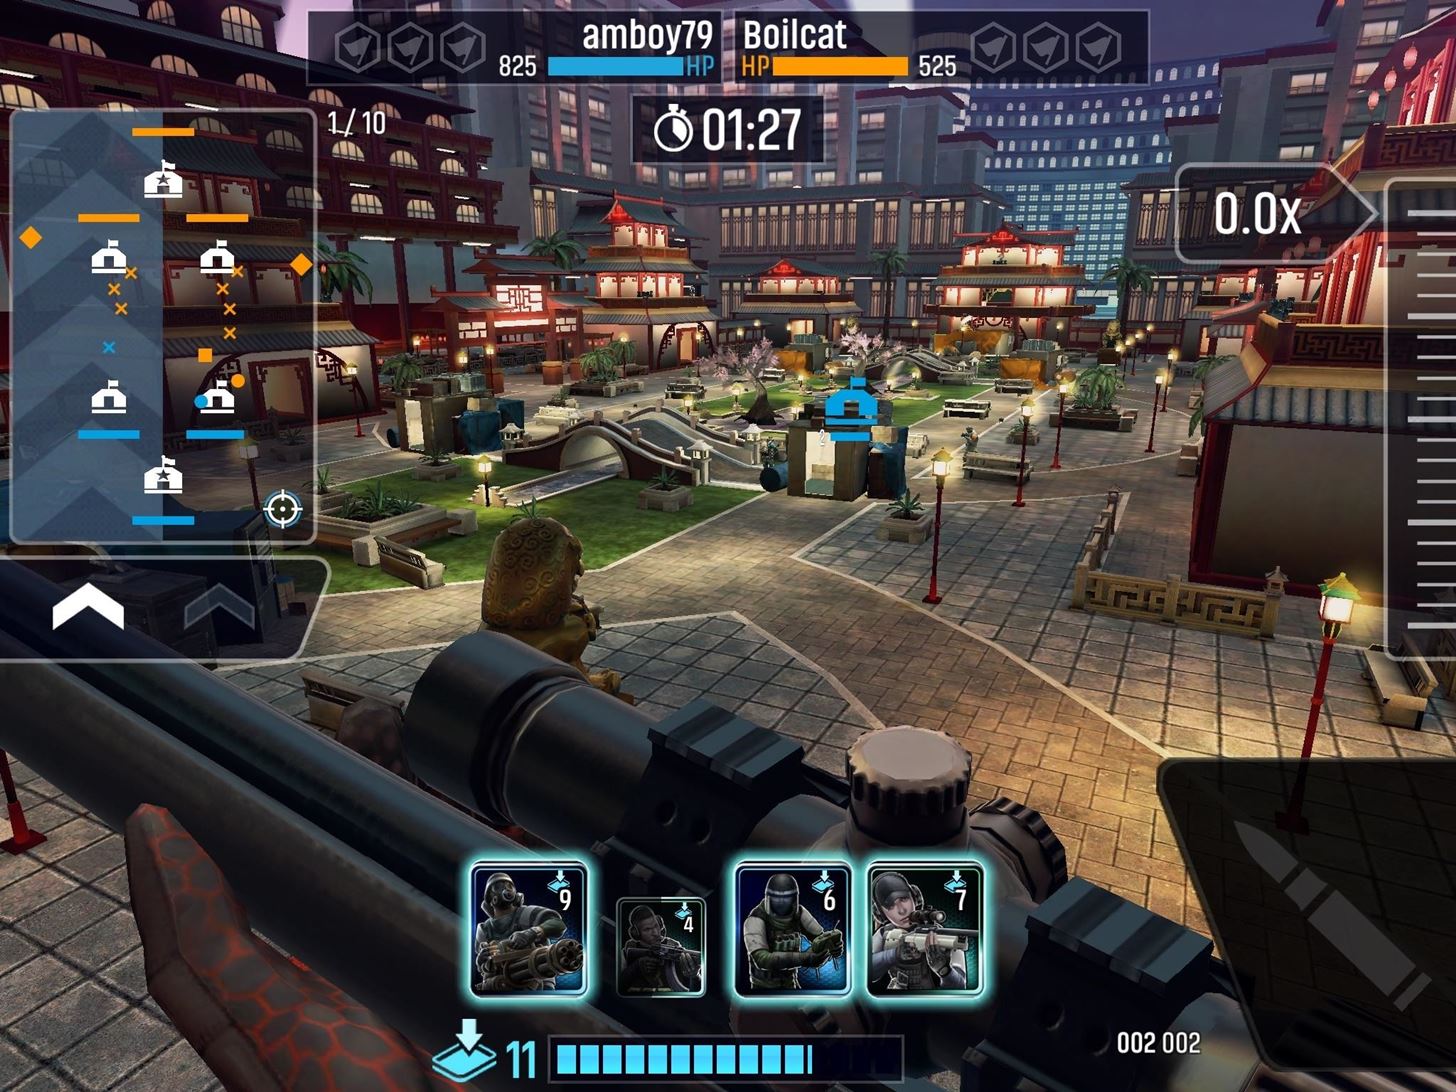 Play Tom Clancy's ShadowBreak on Your iPhone or Android Before Its Official Release